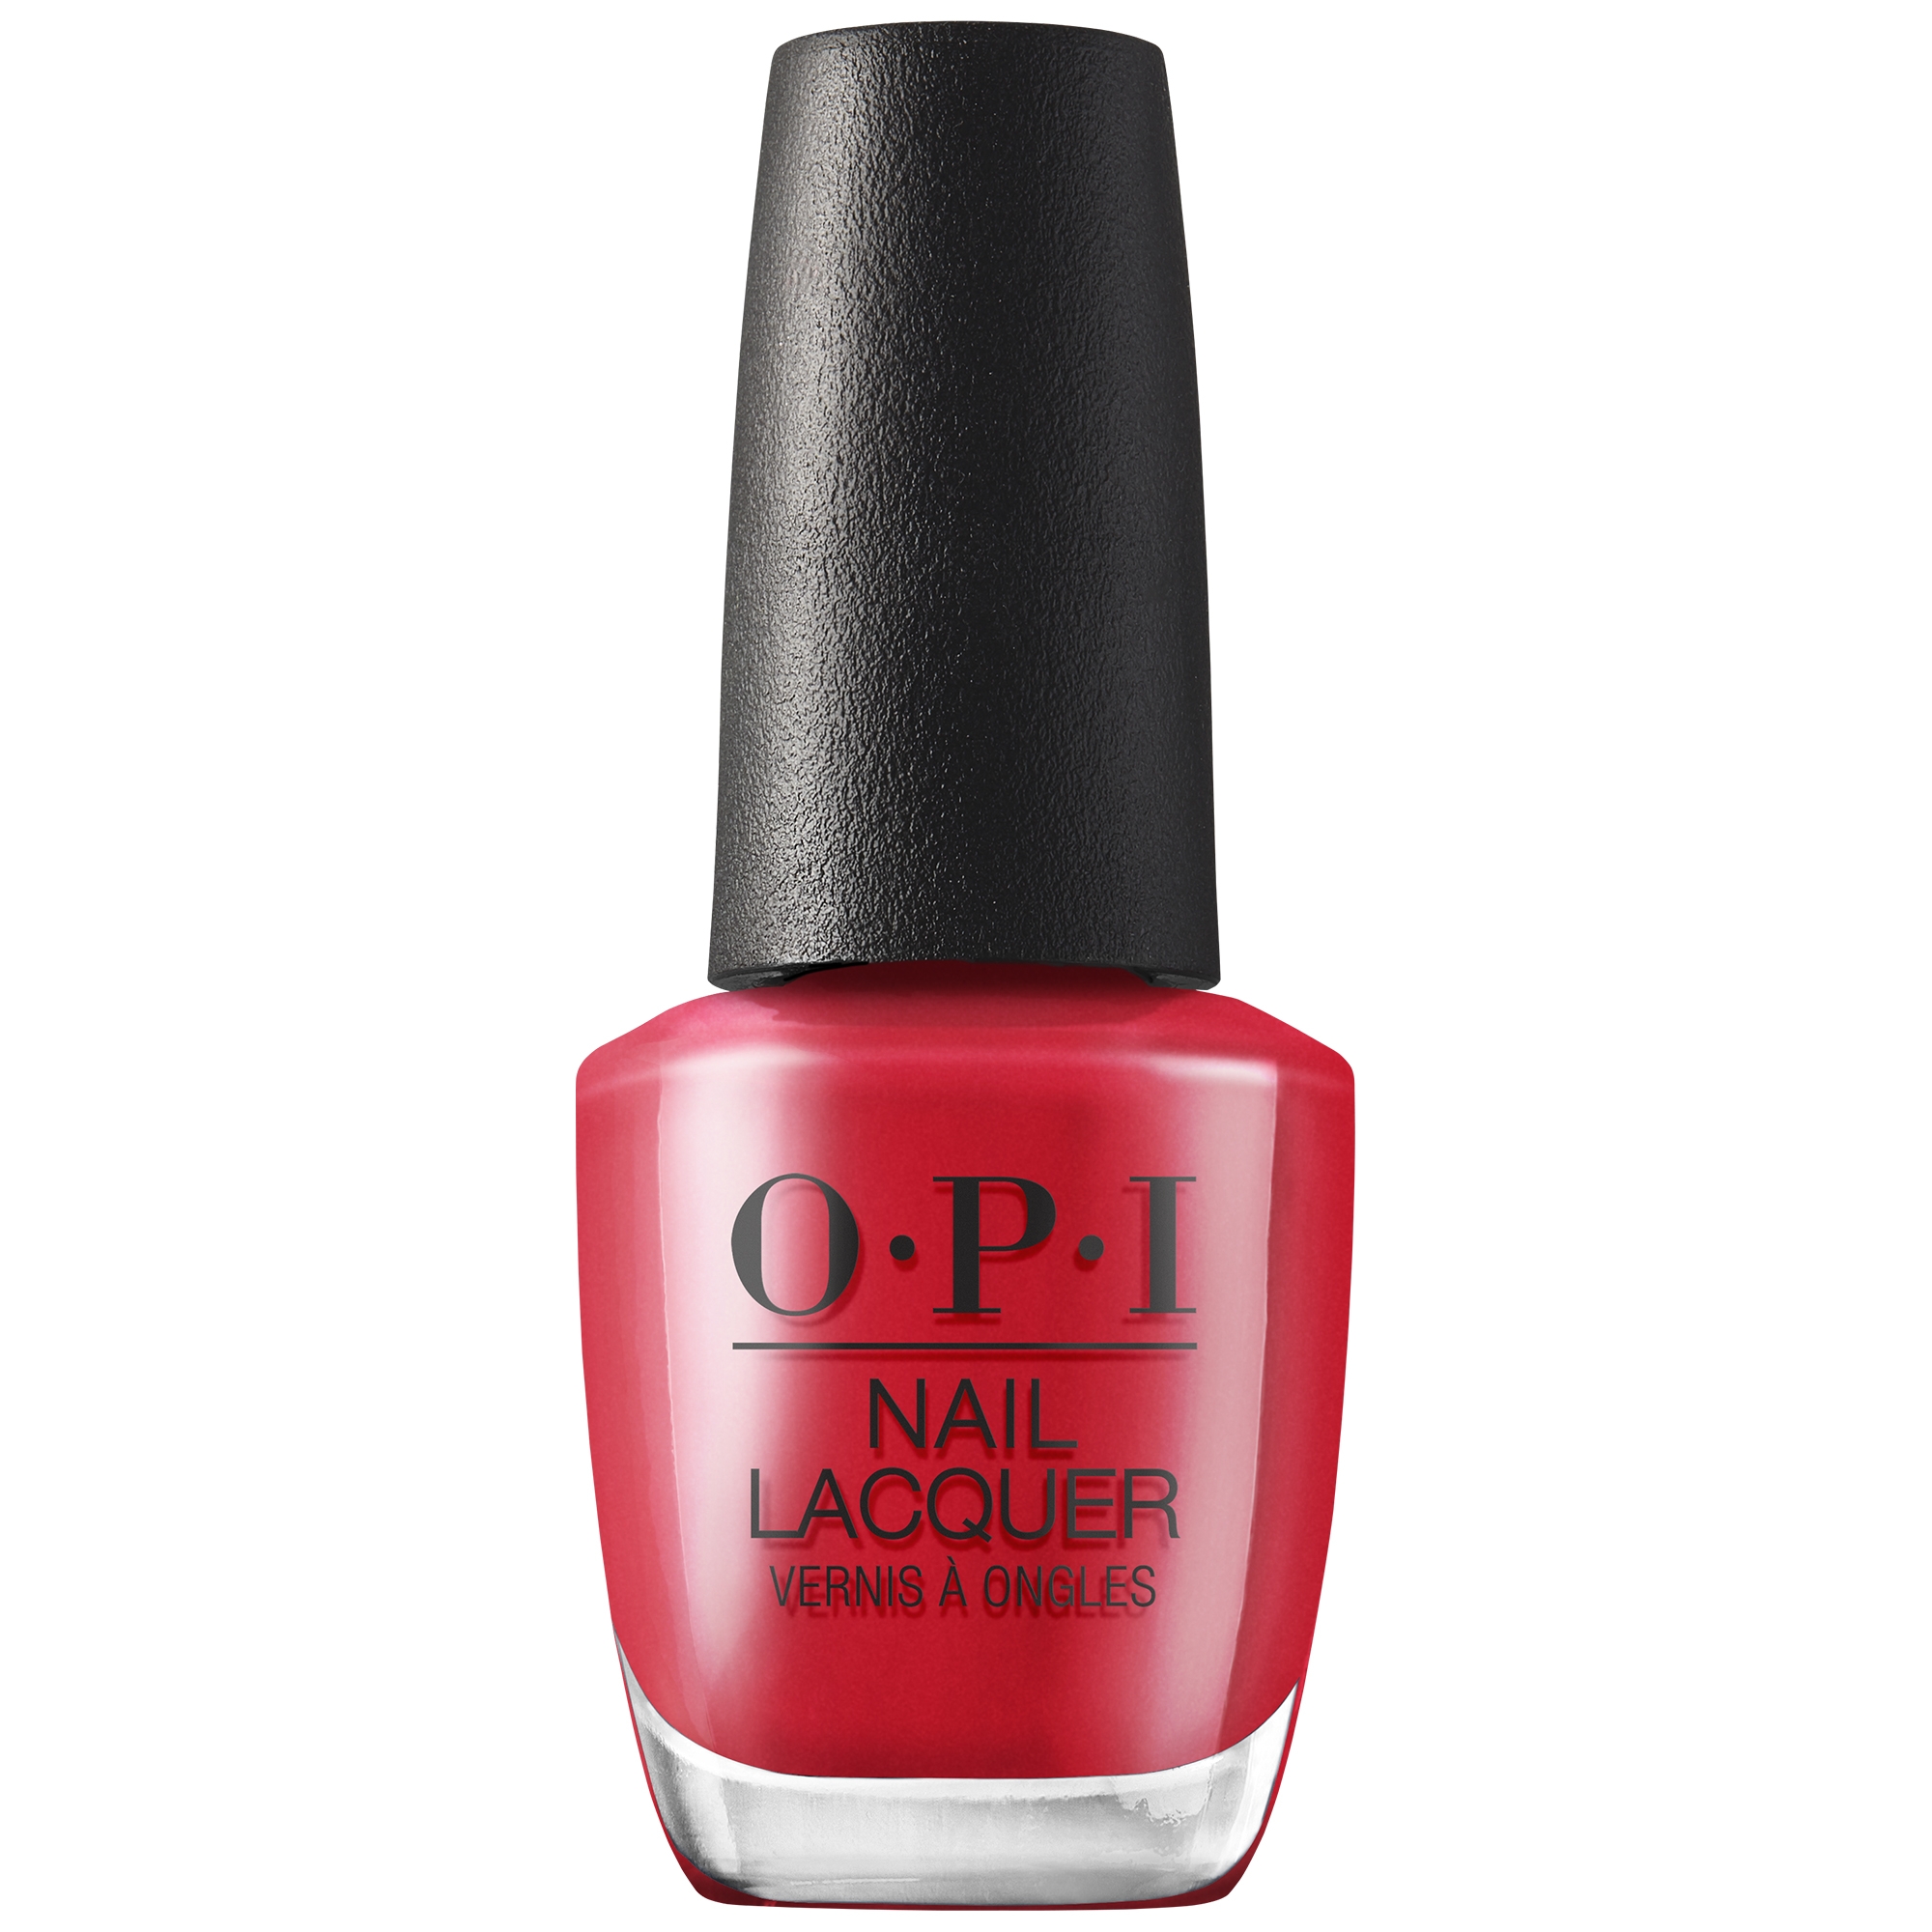 OPI Hollywood Collection: Emmy, Have You Seen Oscar?